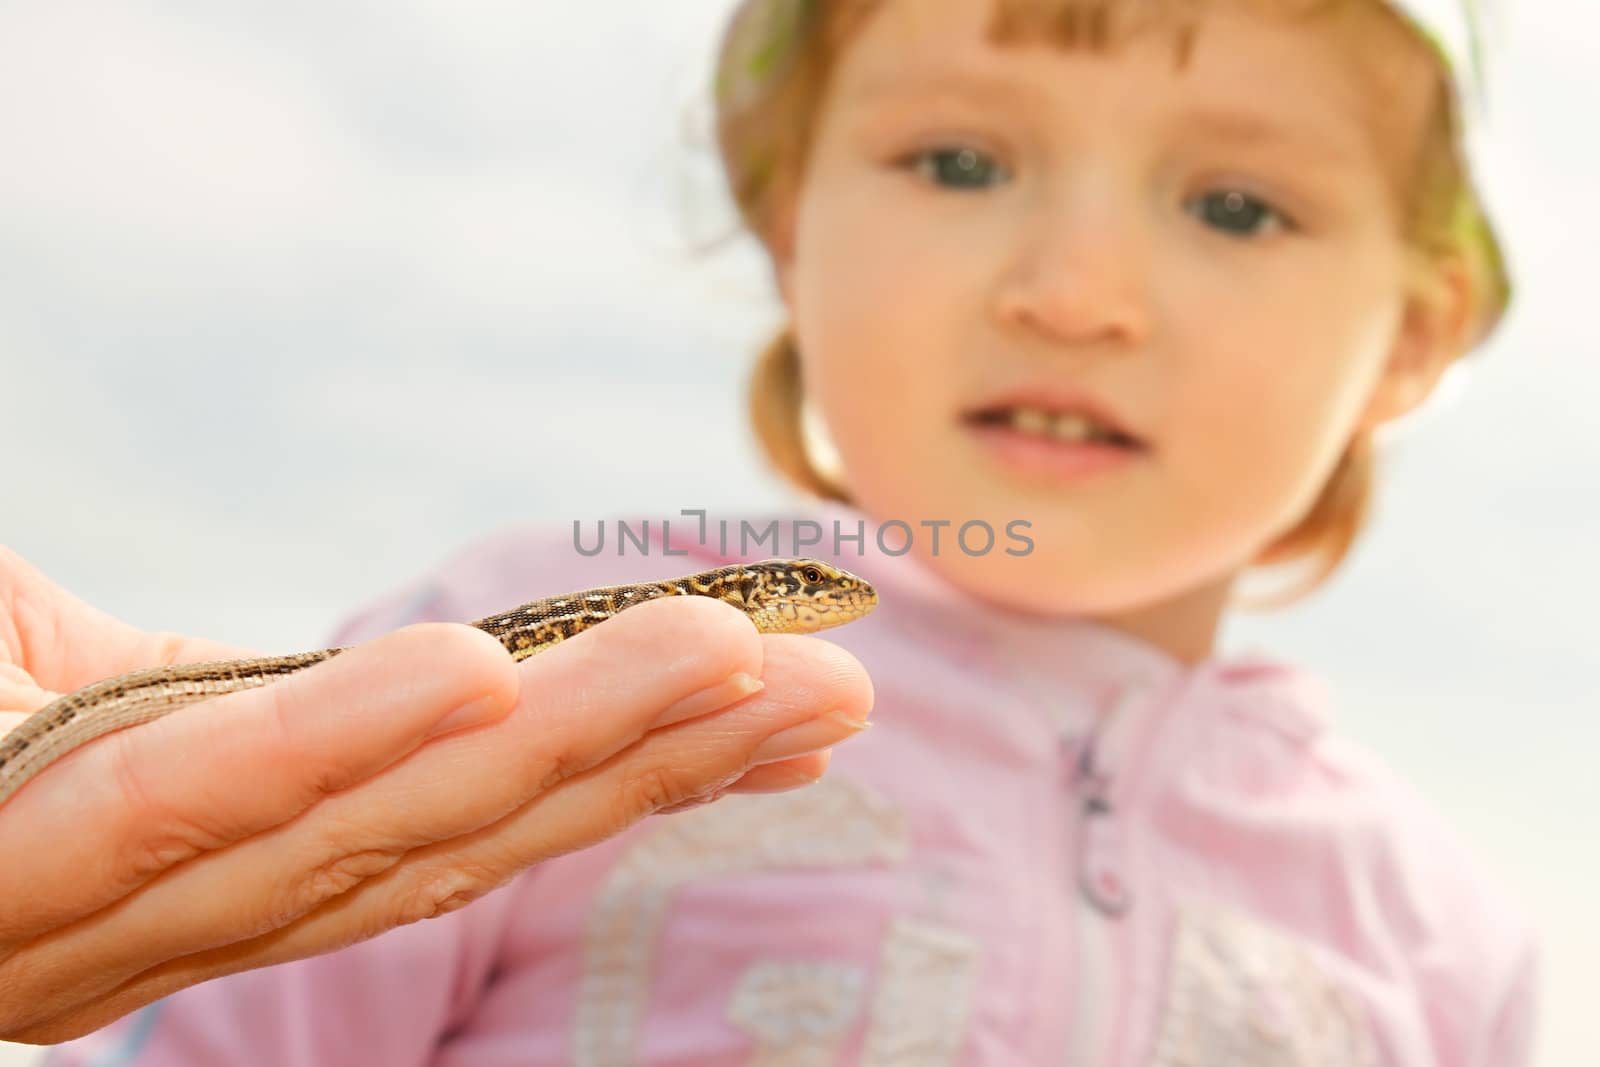 Little girl watching in amazement at the lizard on the hand of adult person